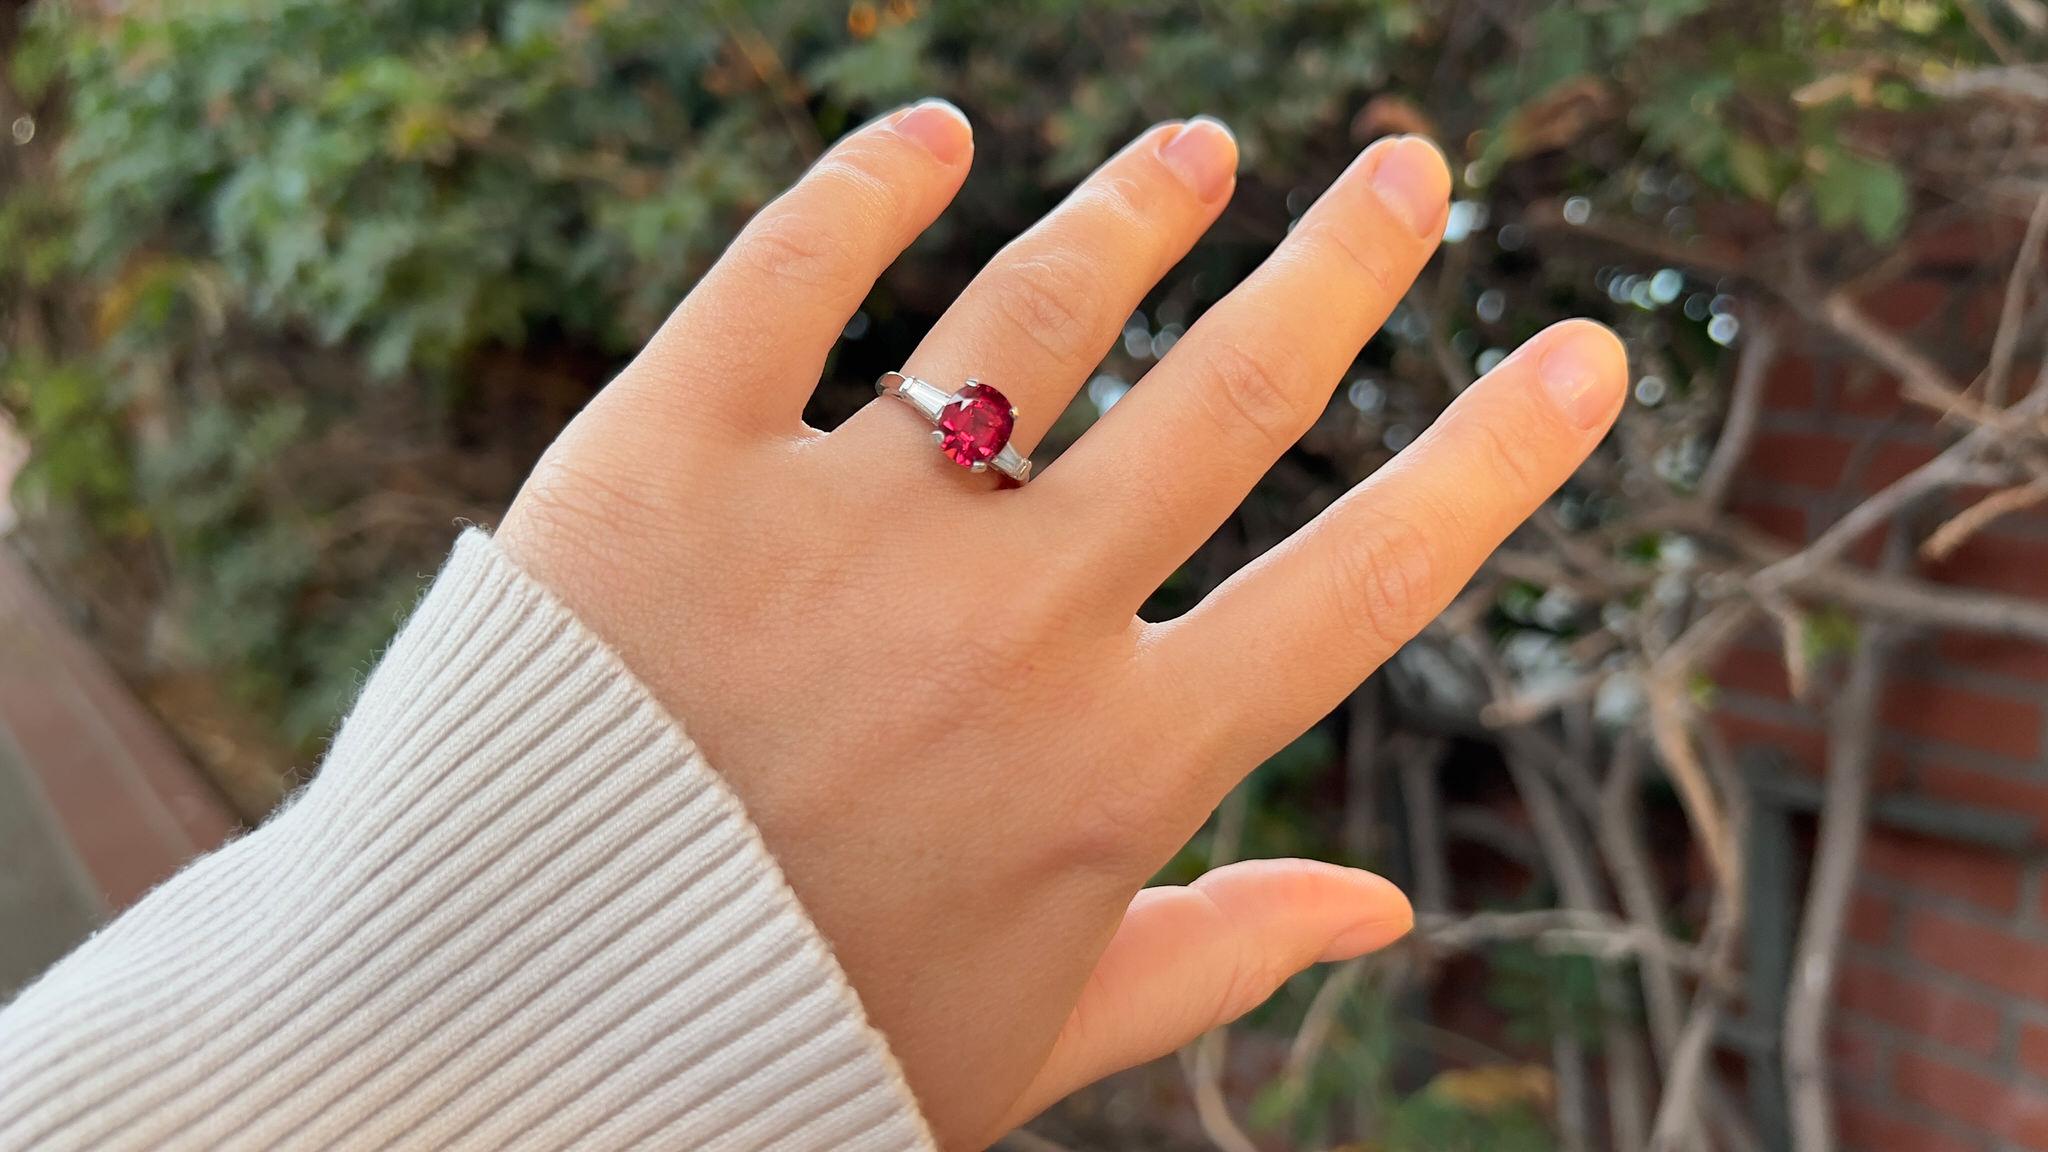 Hot Pink Spinel = 2.80 Carat
(Cut: Oval, Color: Pink, Origin: Natural)
Diamond = 0.28 Carats
(Cut: Tapered Baguette, Color: F, Clarity: VS)
Metal = Platinum
Ring Size = 6